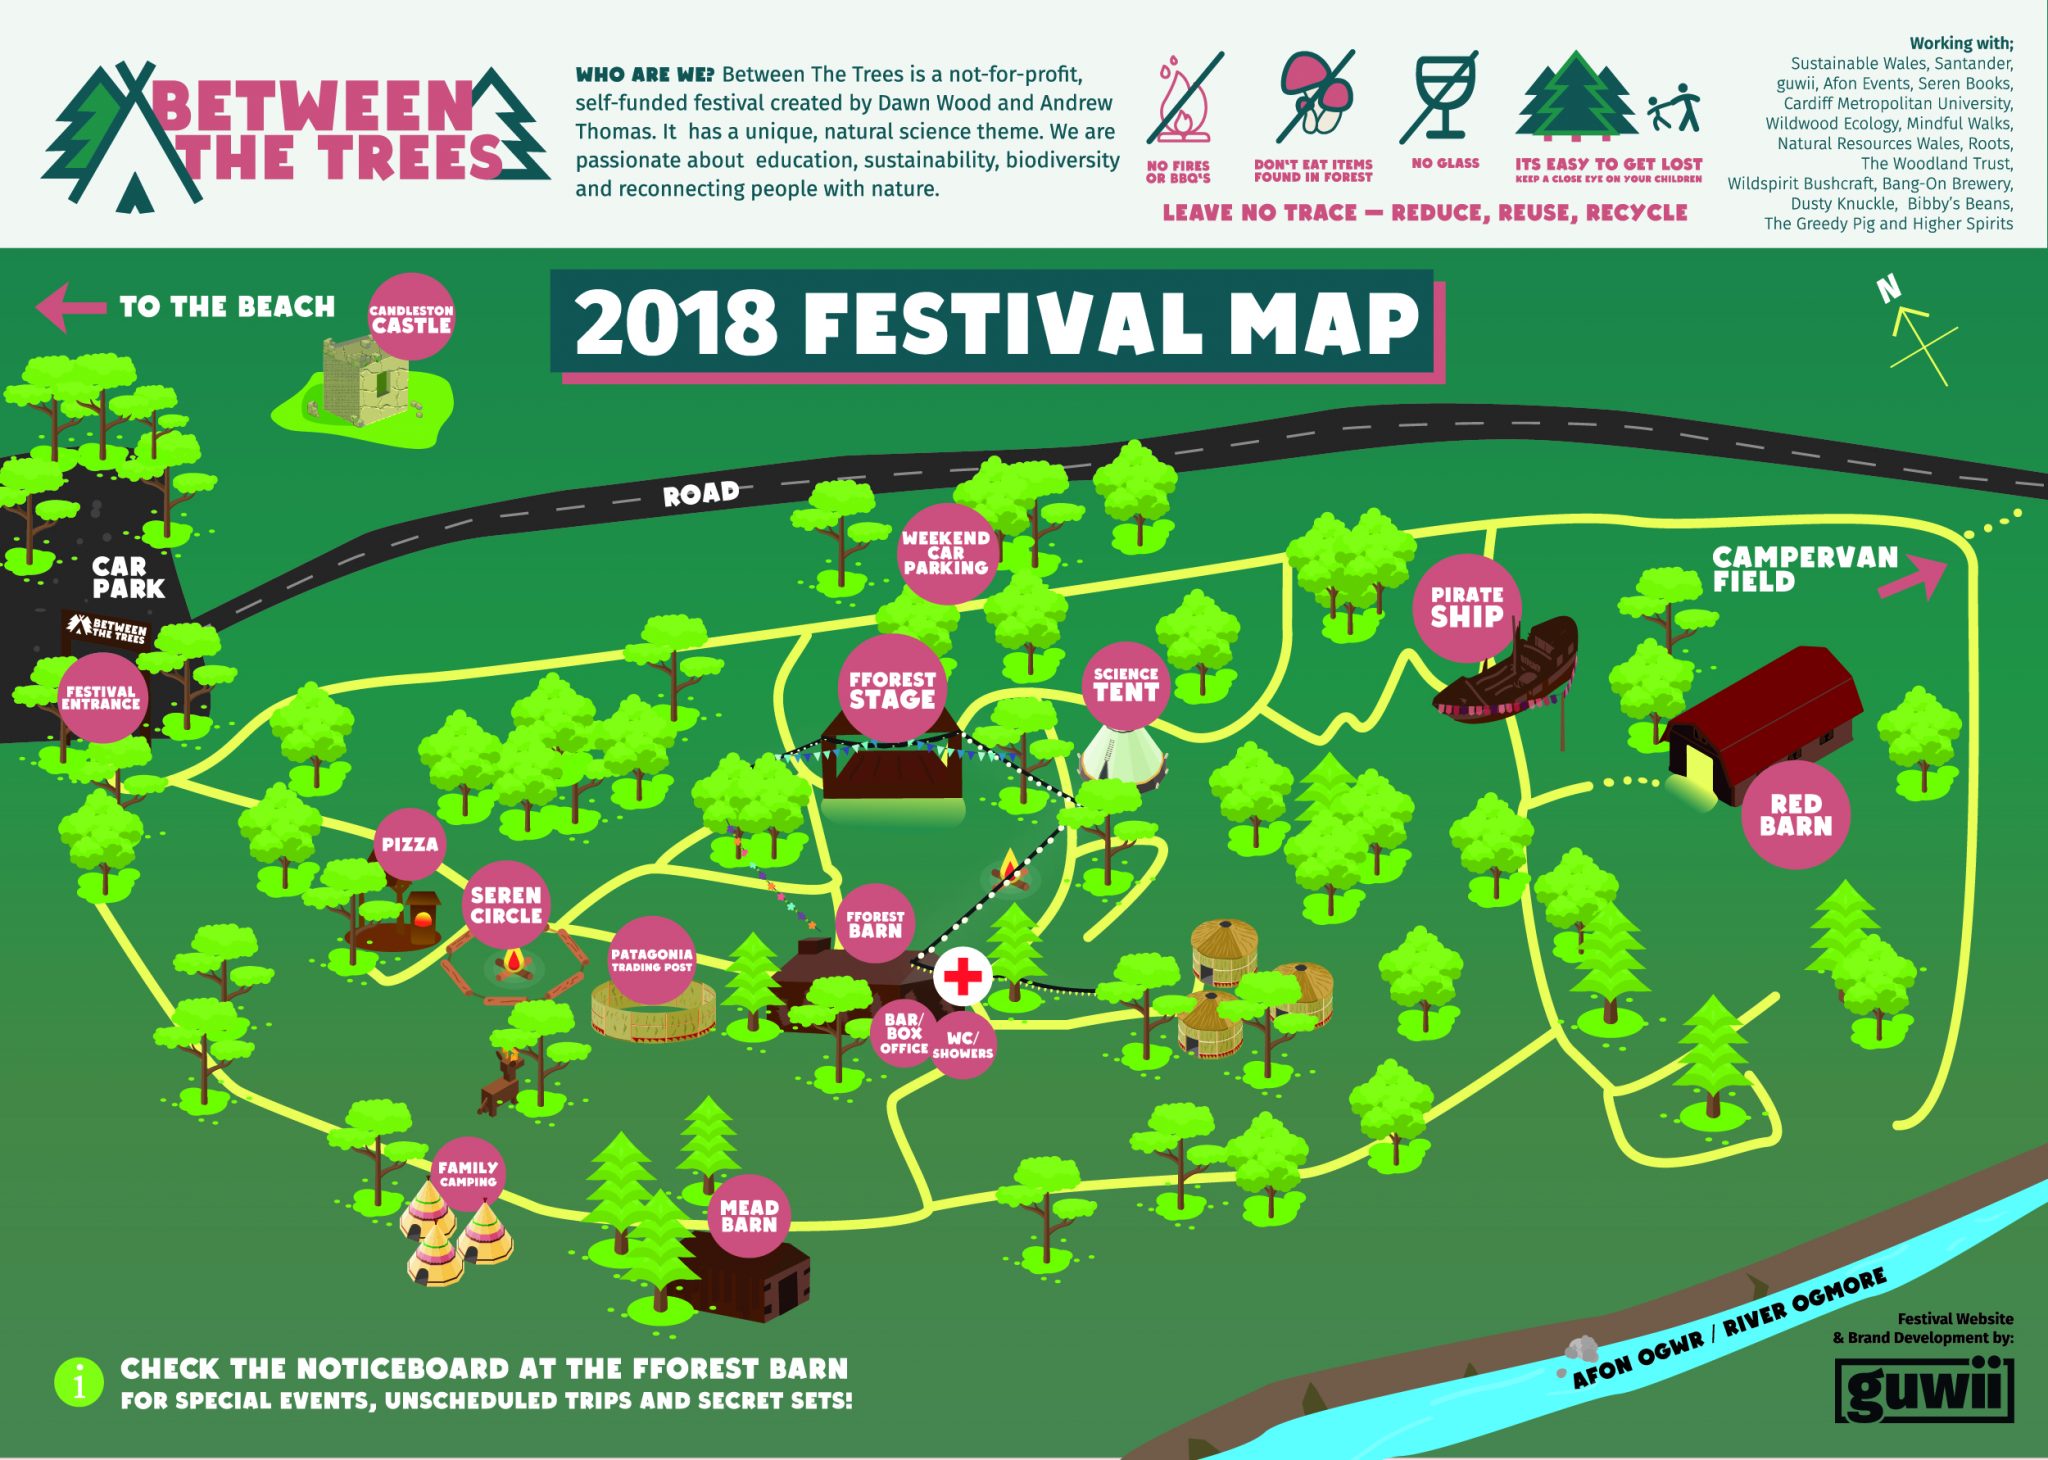 Between The Trees 2018 festival map